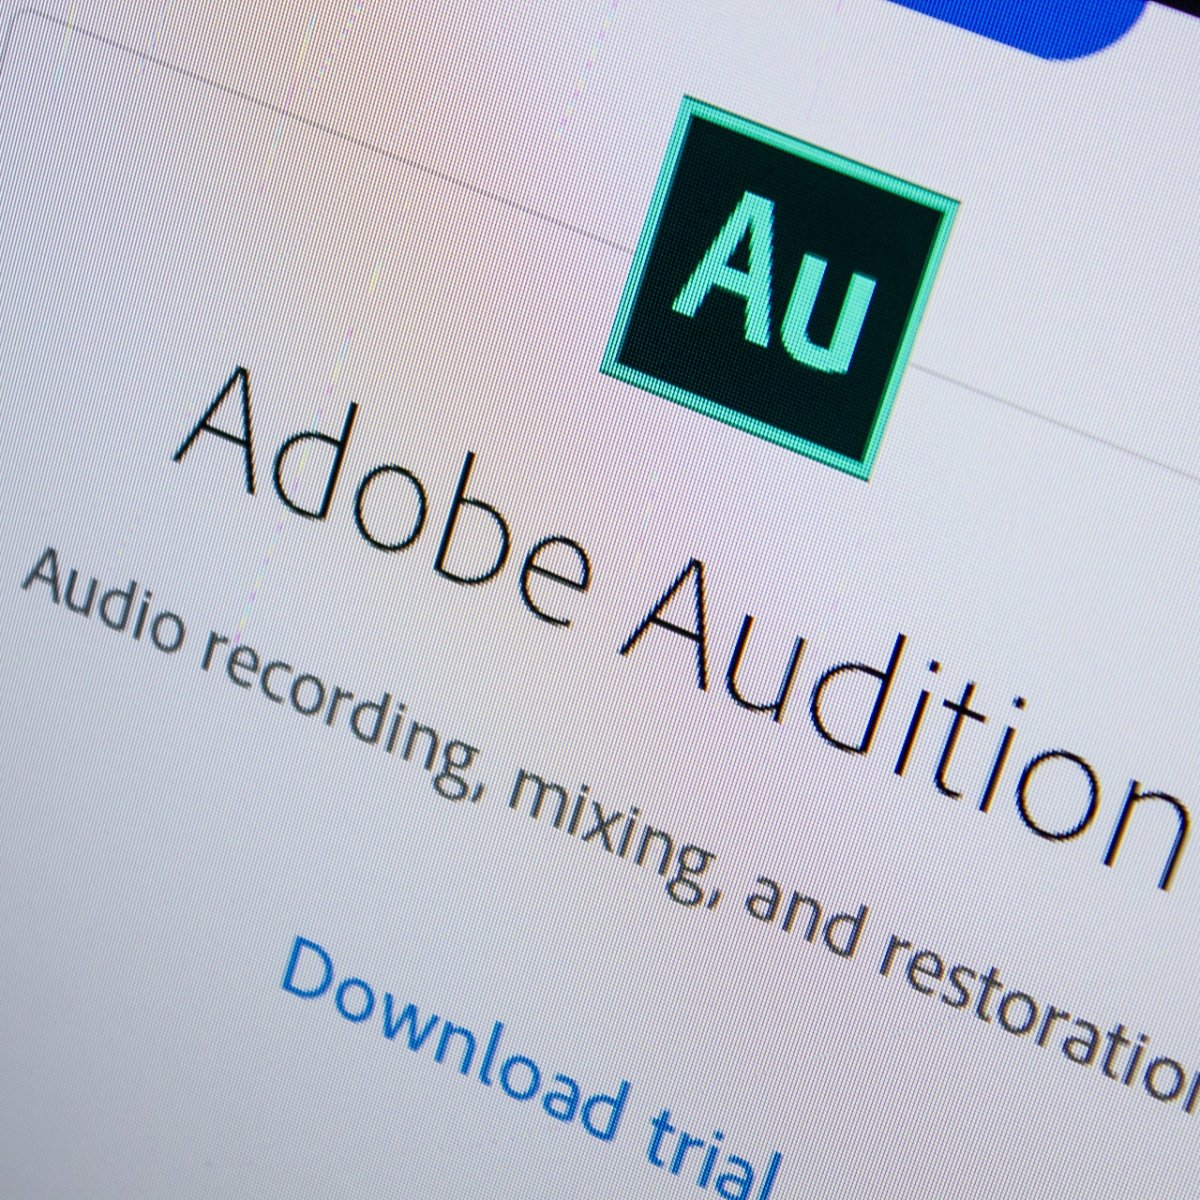 autotune download for adobe audition 1.5